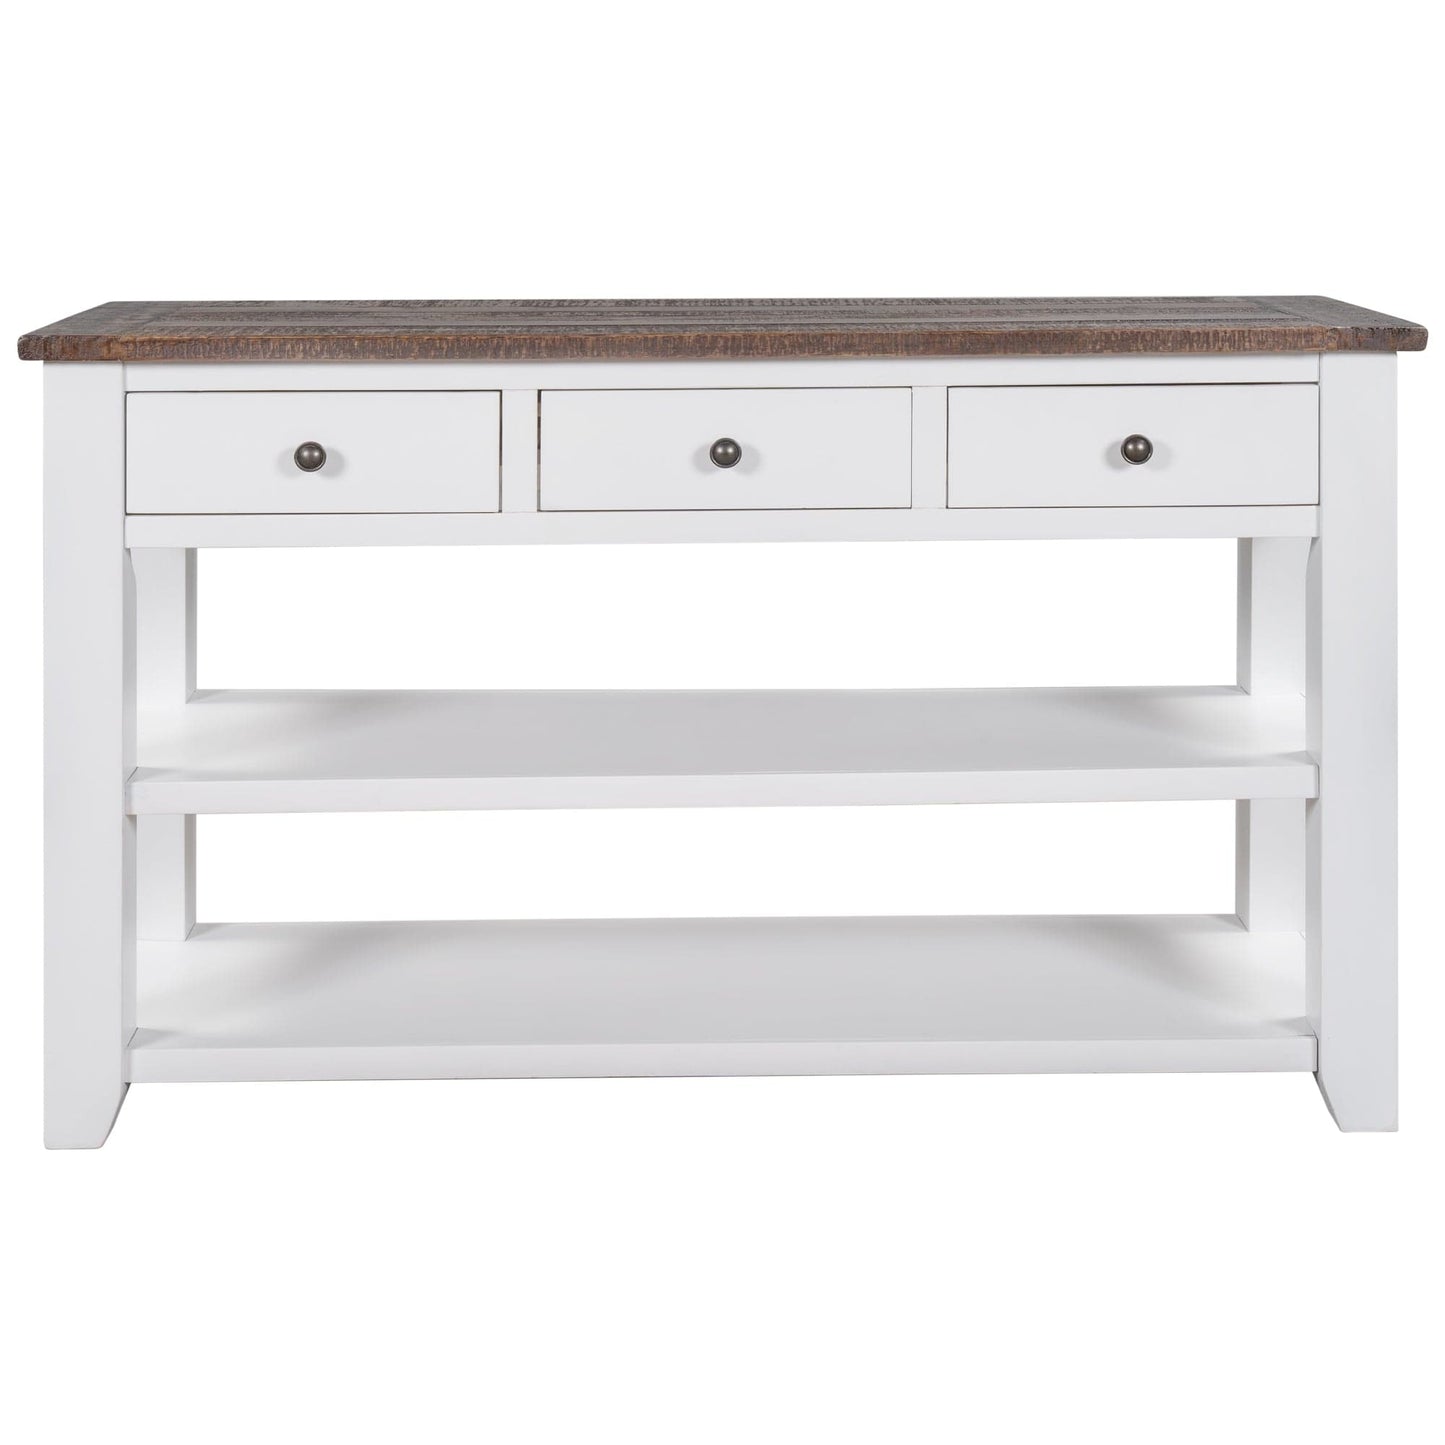 1st Choice Furniture Direct Console Table 1st Choice American style console table with Solid and stable design